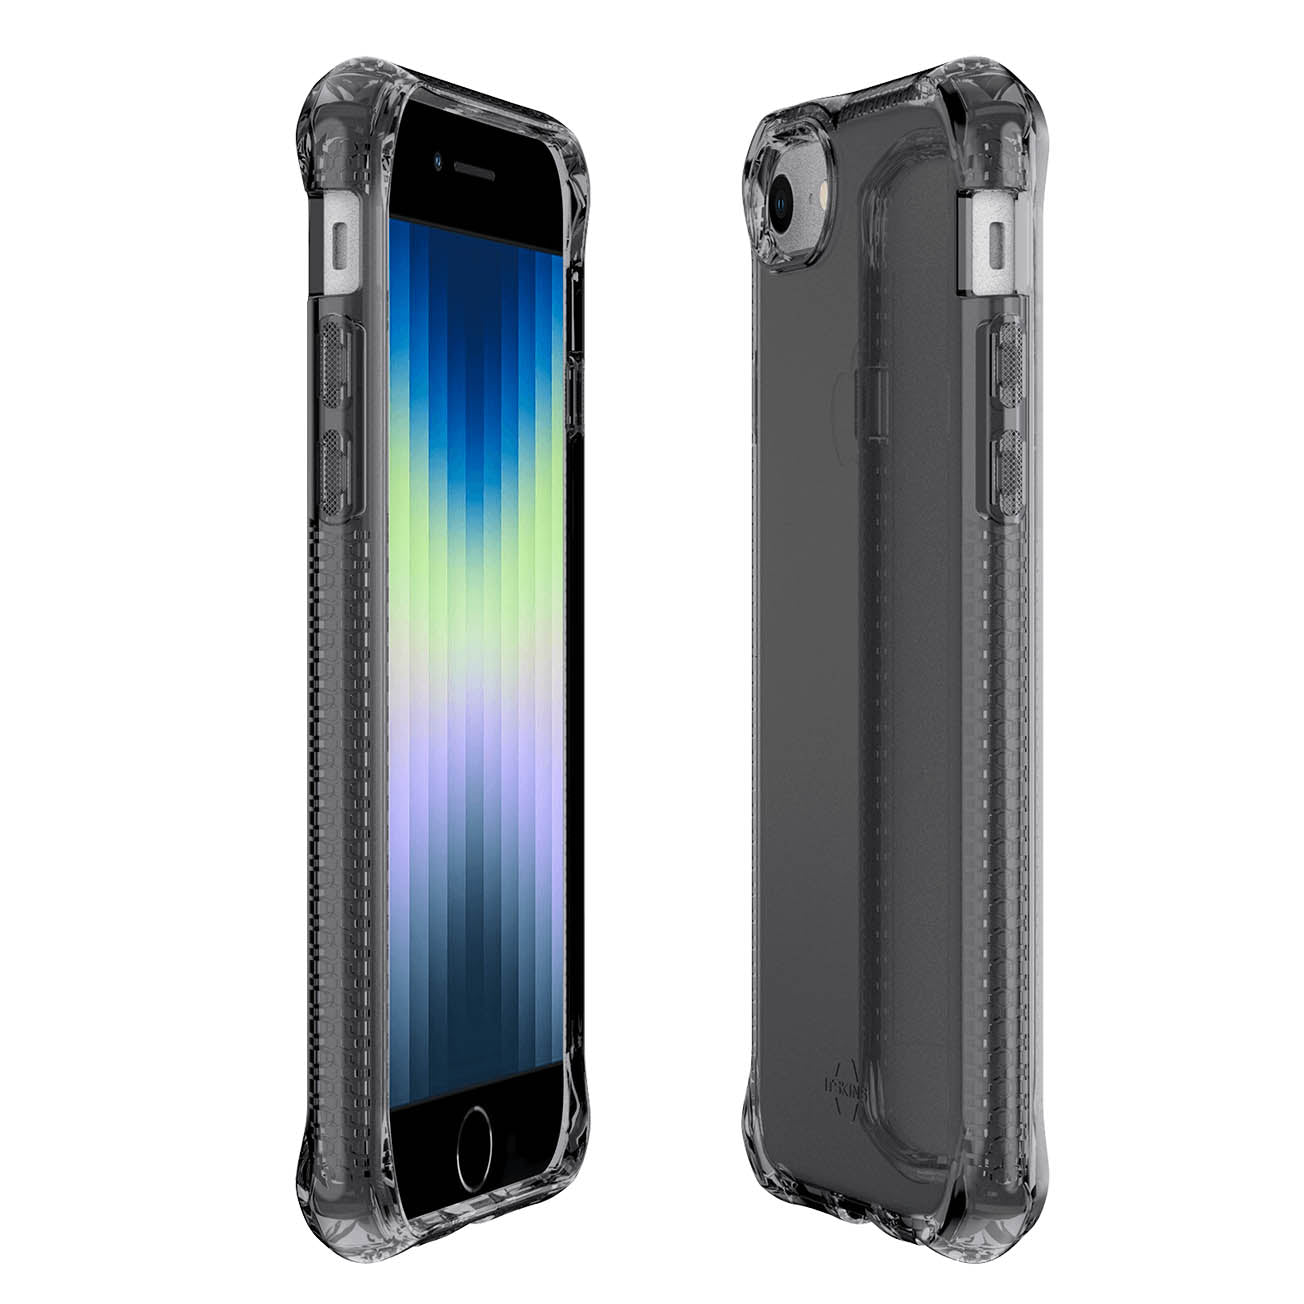 ITSKINS Spectrum Clear Case For iPhone SE ( 2022, 2020 ), 8, 7, 6 - Smoke